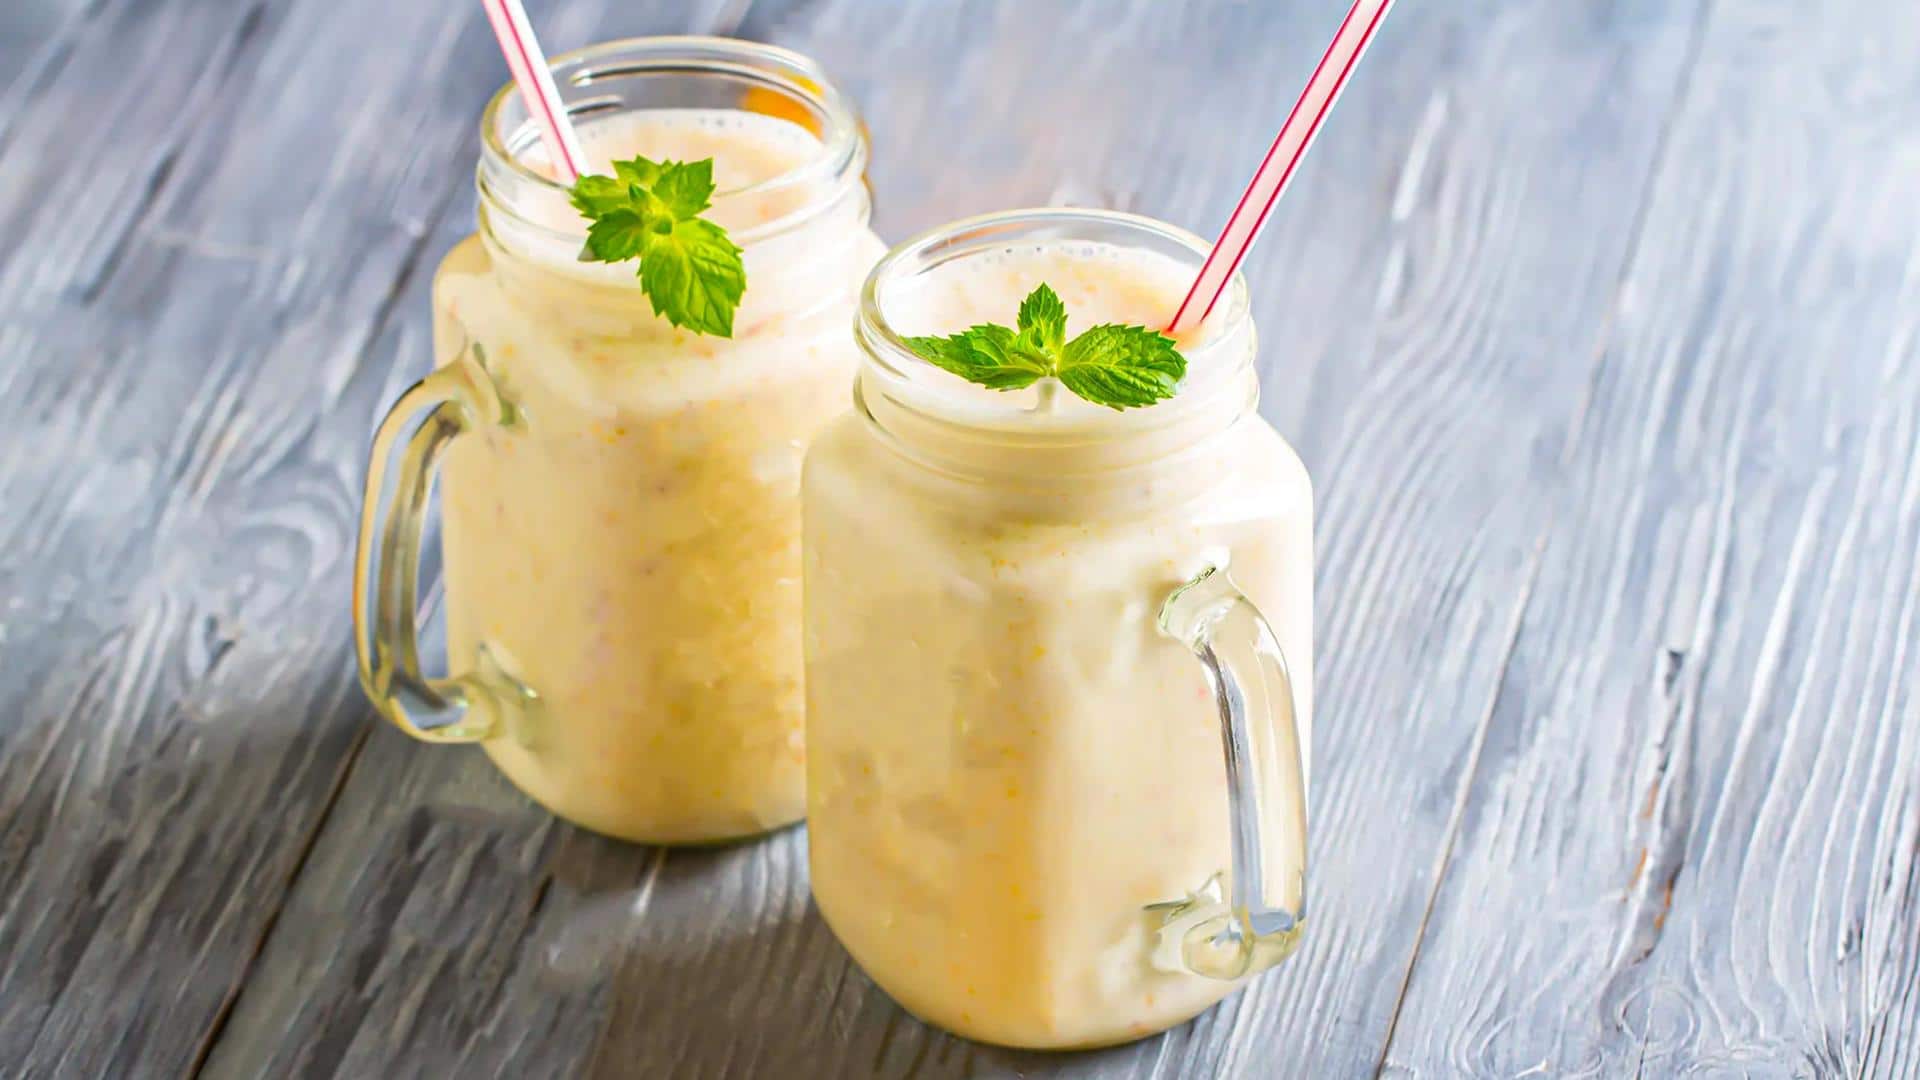 Sattu makes summers tolerable: Here's why you should drink it